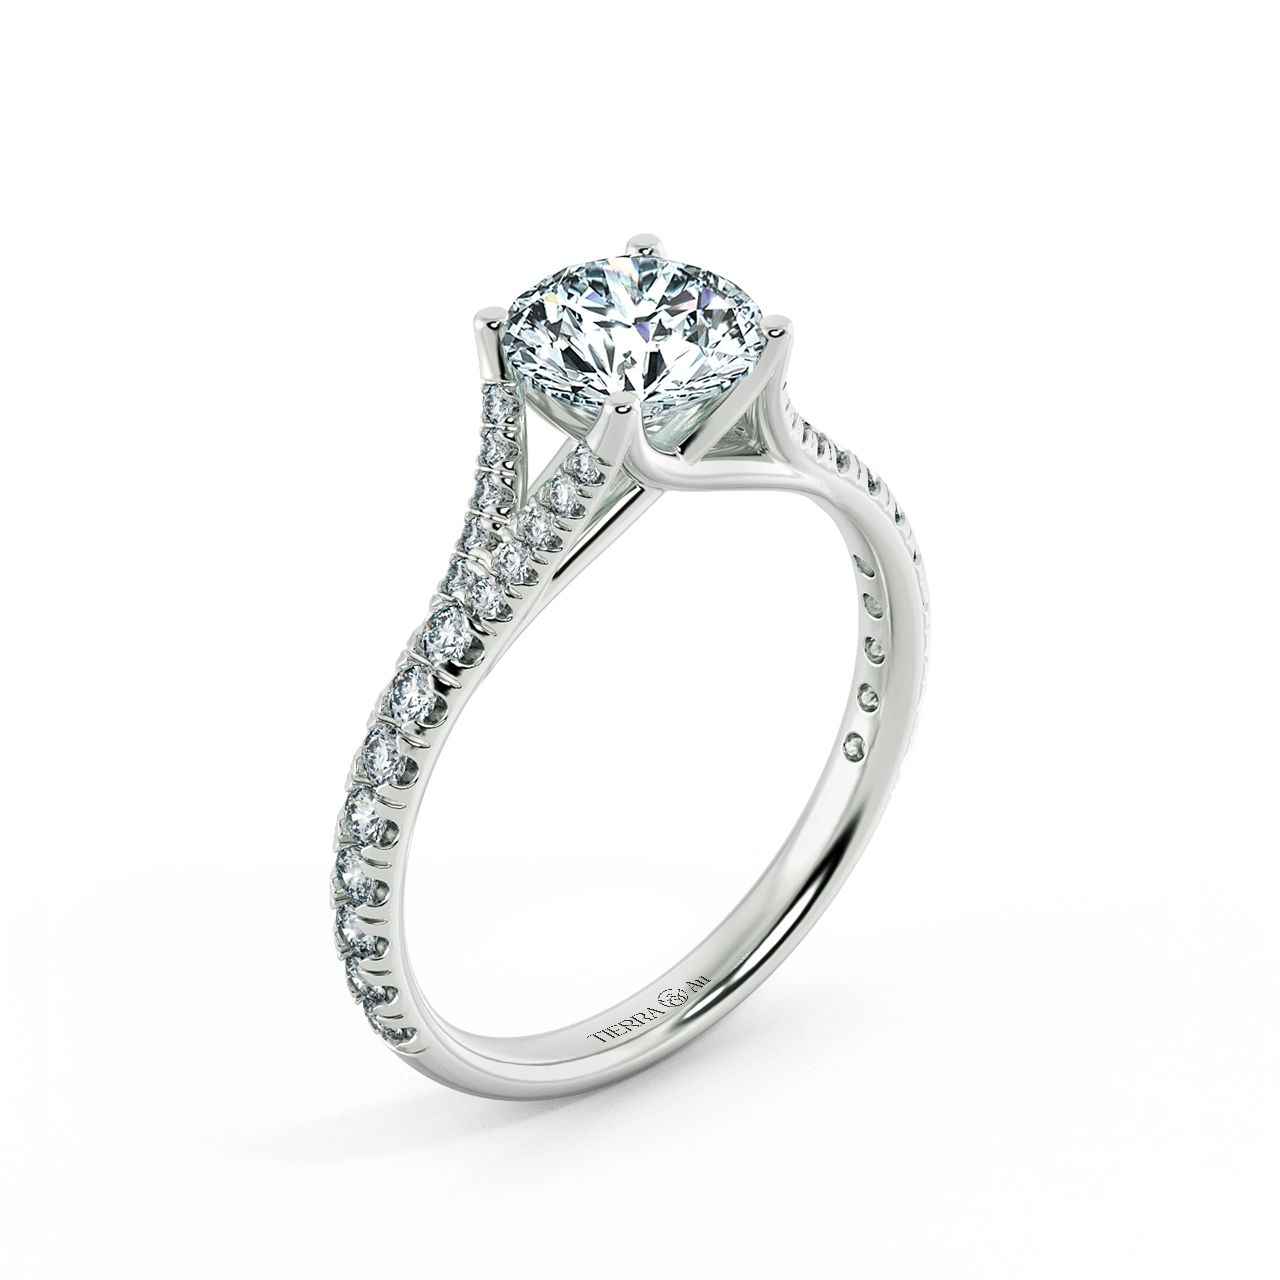 Four Prongs Trellis Engagement Ring with Pave Band NCH1404 5